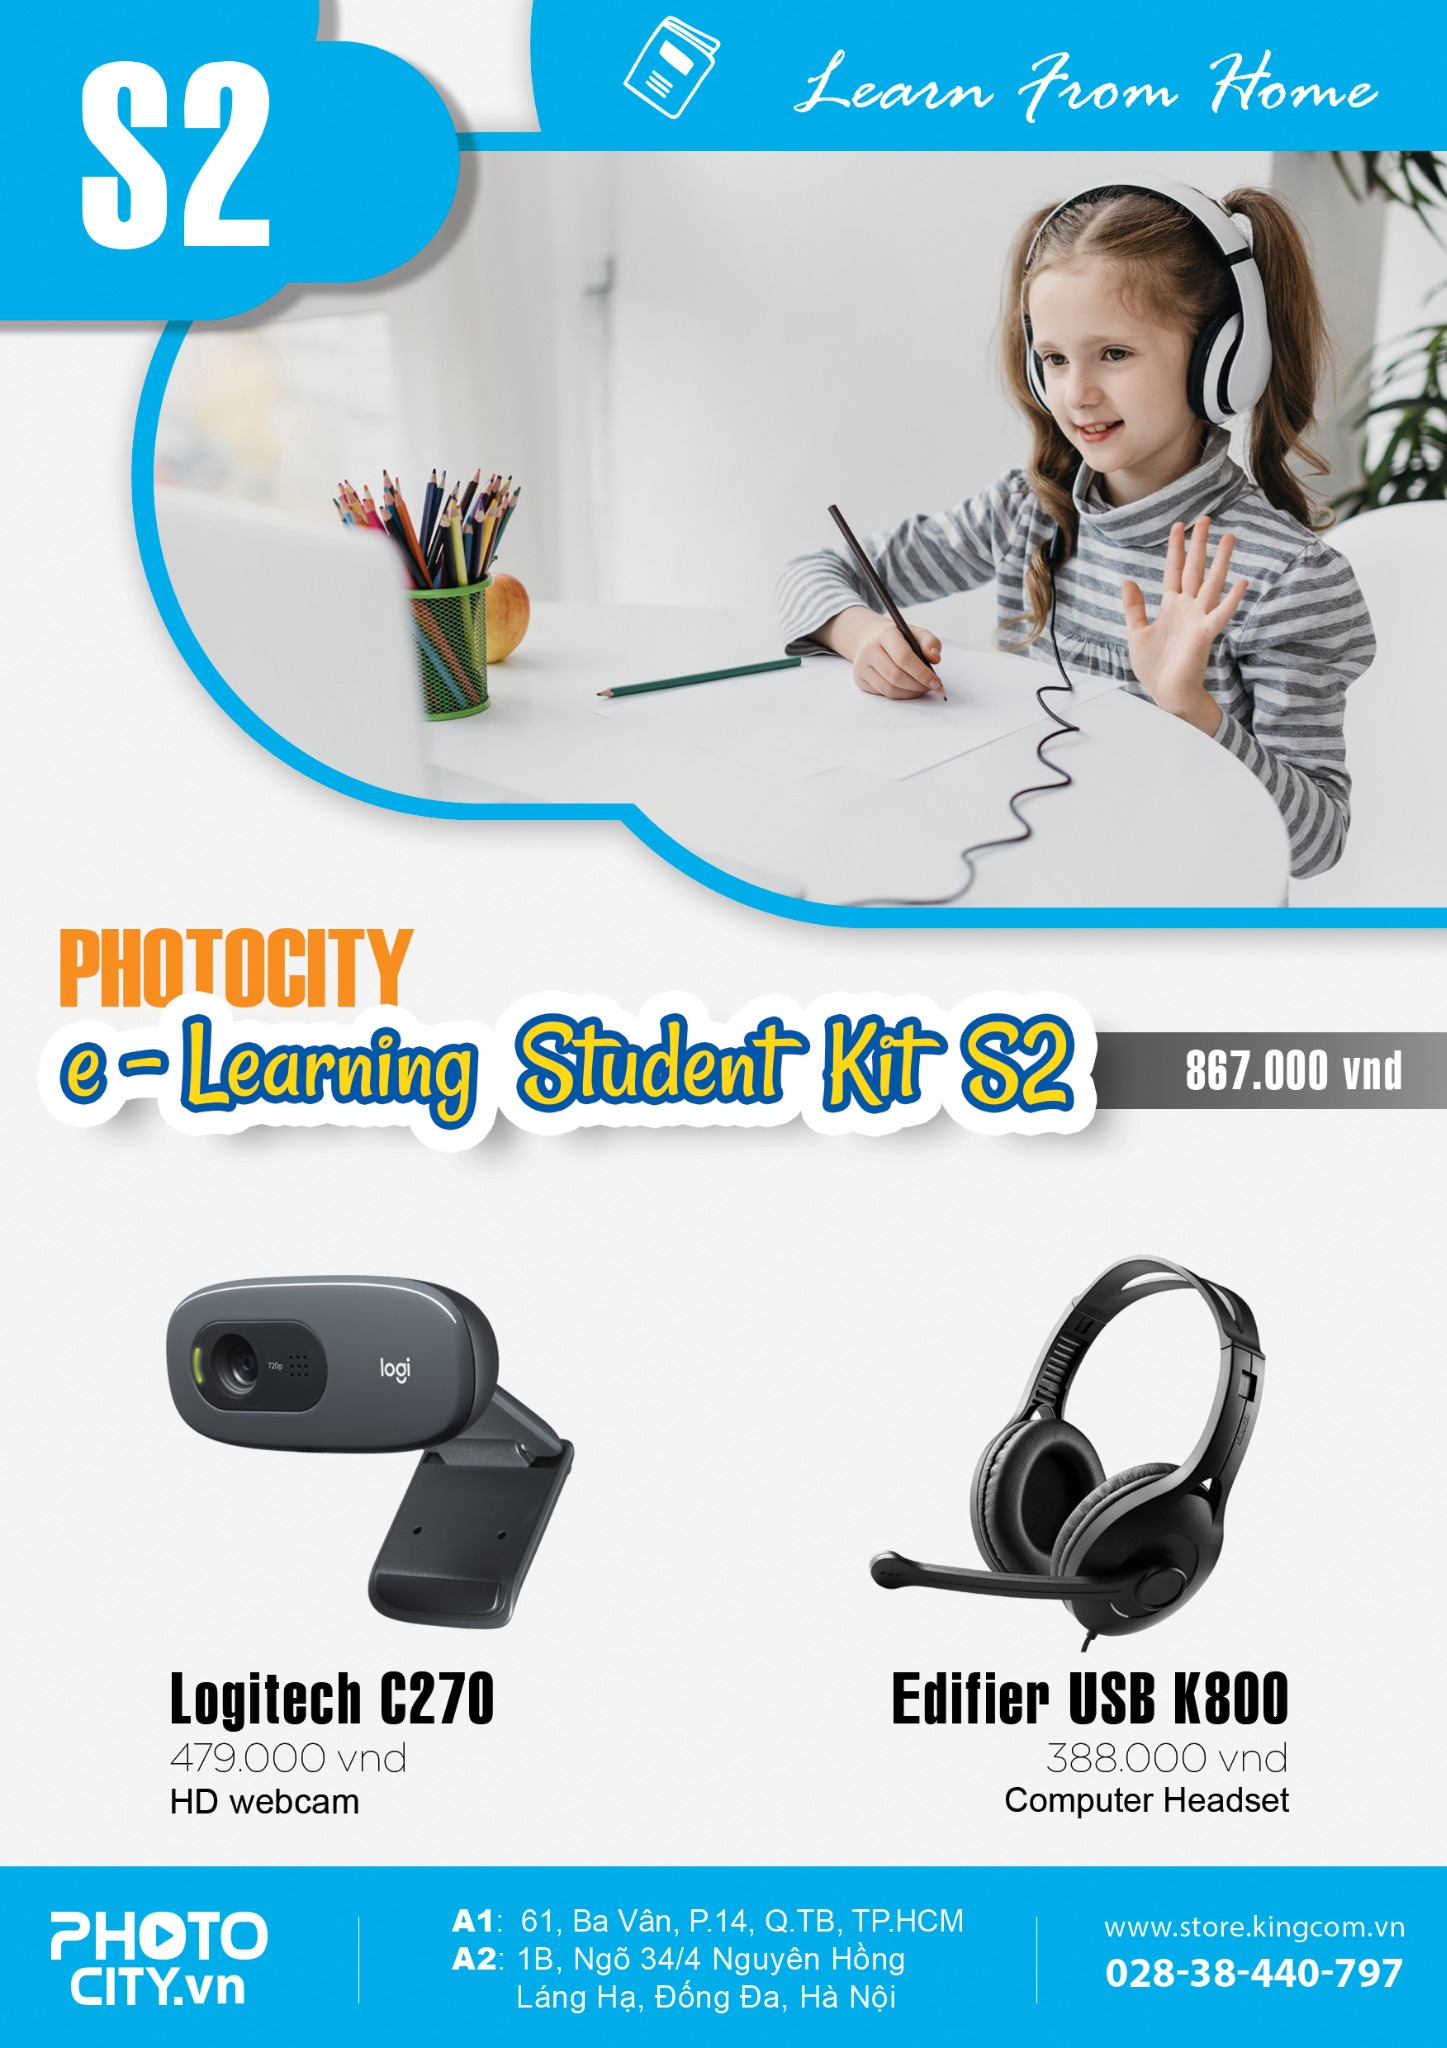 PhotoCity e -learning Student Kit S2 (Bộ dụng cụ học online)